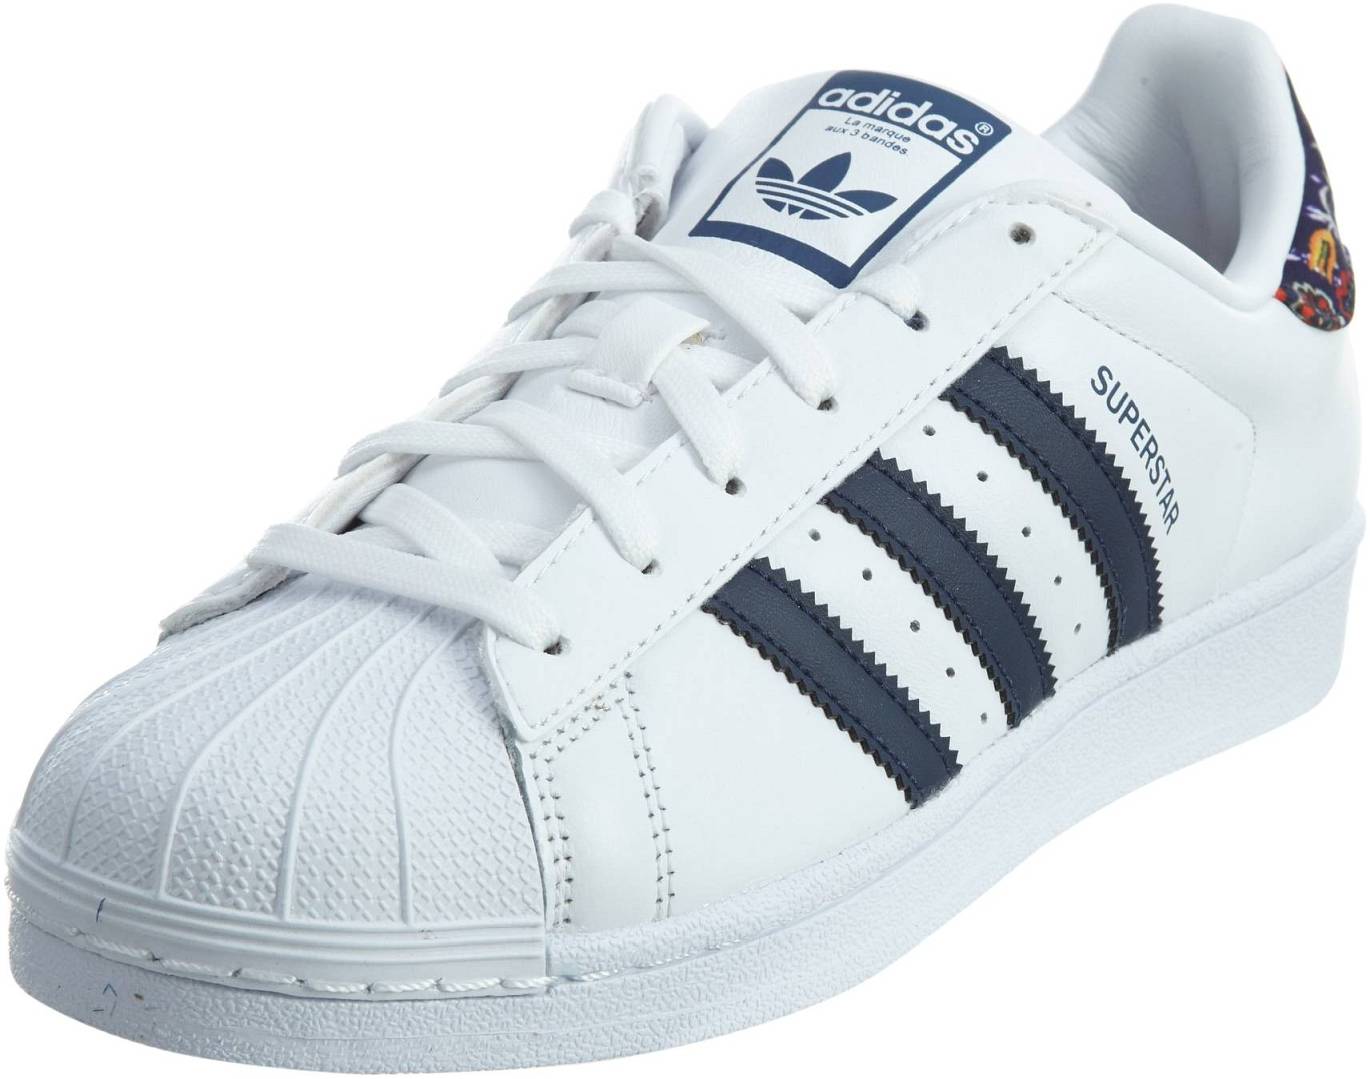 Adidas Superstar – Shoes Reviews & Reasons To Buy